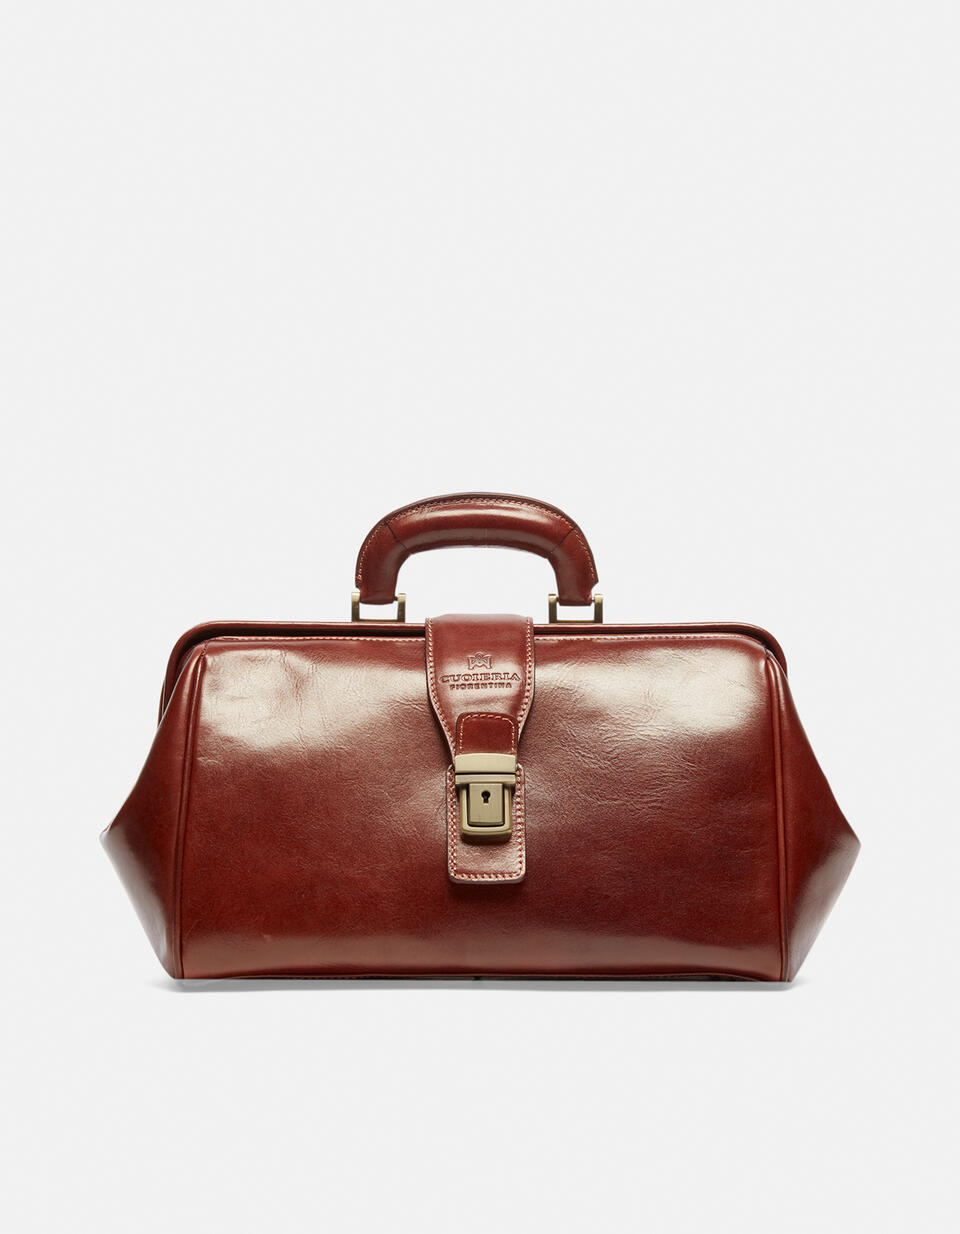 Small leather doctor's bag - Doctor Bags | Briefcases  - Doctor Bags | BriefcasesCuoieria Fiorentina